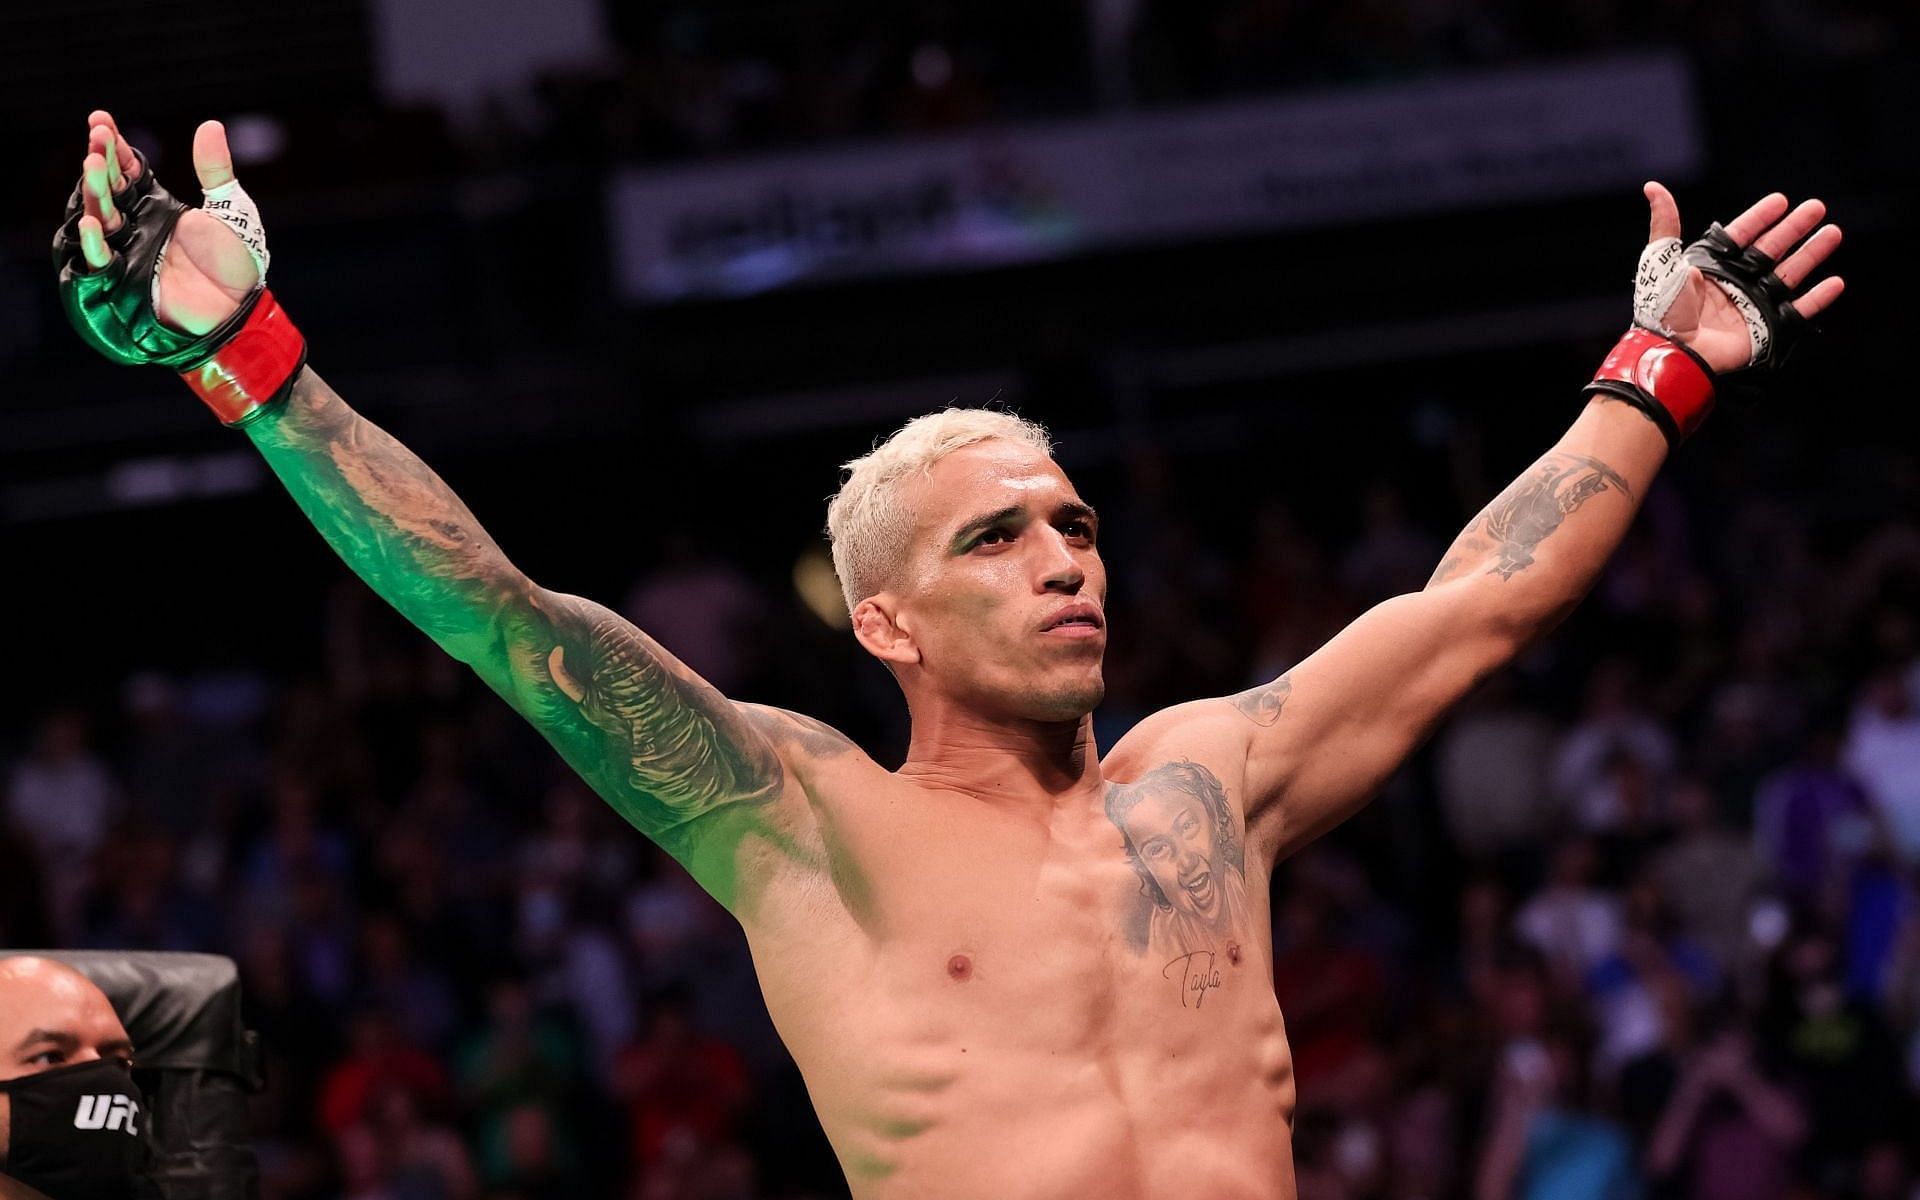 Charles Oliveira&#039;s first UFC title defense against Dustin Poirier could end 2021 with a bang